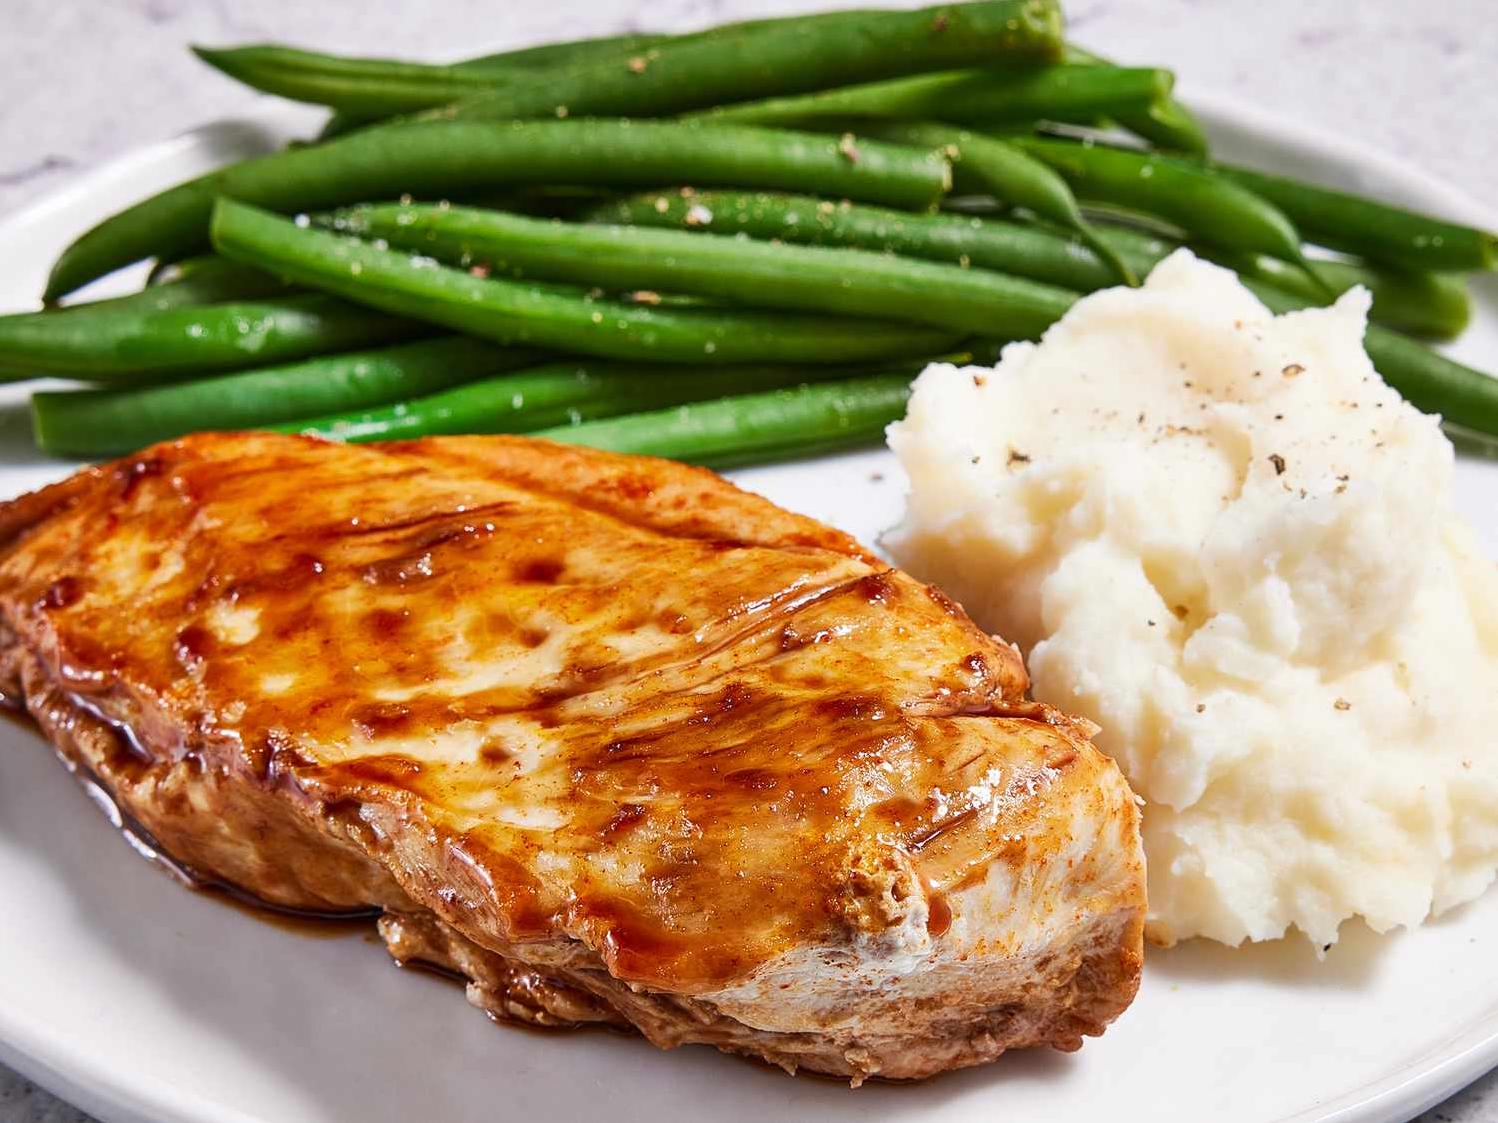  With its rich flavor and aroma, this chicken dish paired with a glass of red wine will make your taste buds dance.